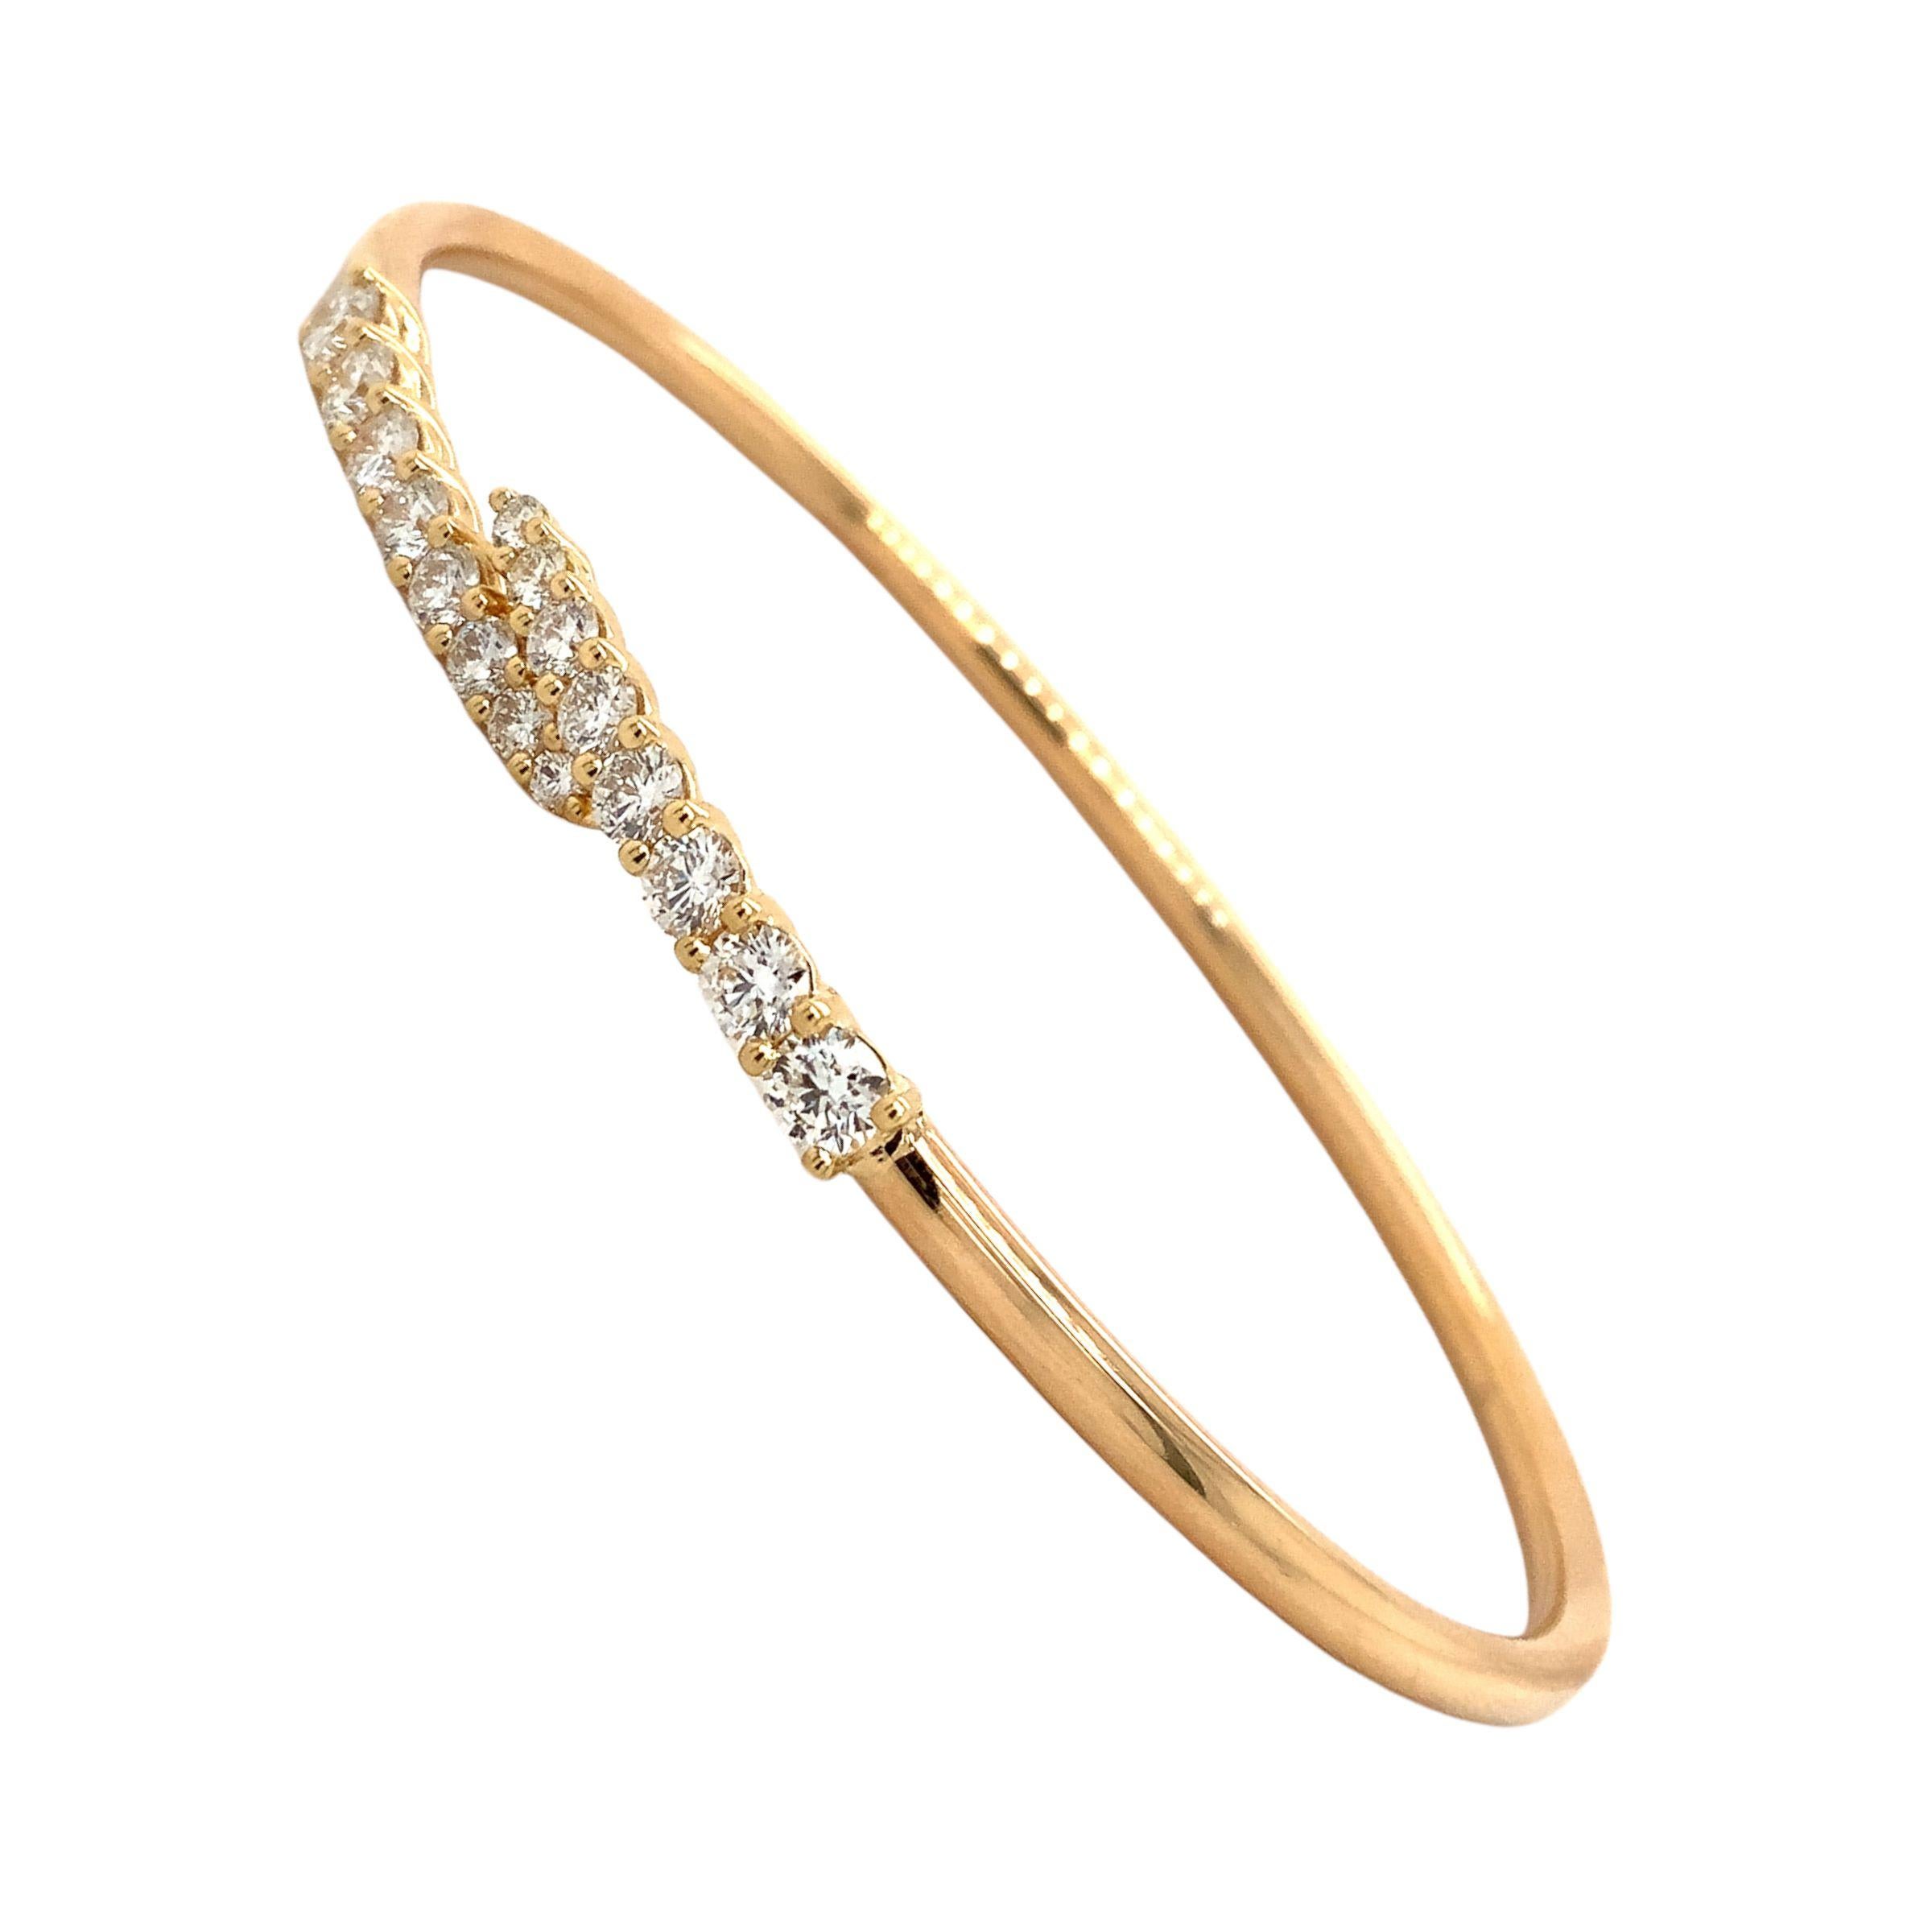 This Memoire Identity Collection Flexi Diamond Bangle is crafted from 18K White Gold and features sixteen Round Brilliant Cut Diamonds, graduating in size for a total carat weight of 1.12ct tw. with F-G Color and VS Clarity for remarkable sparkle